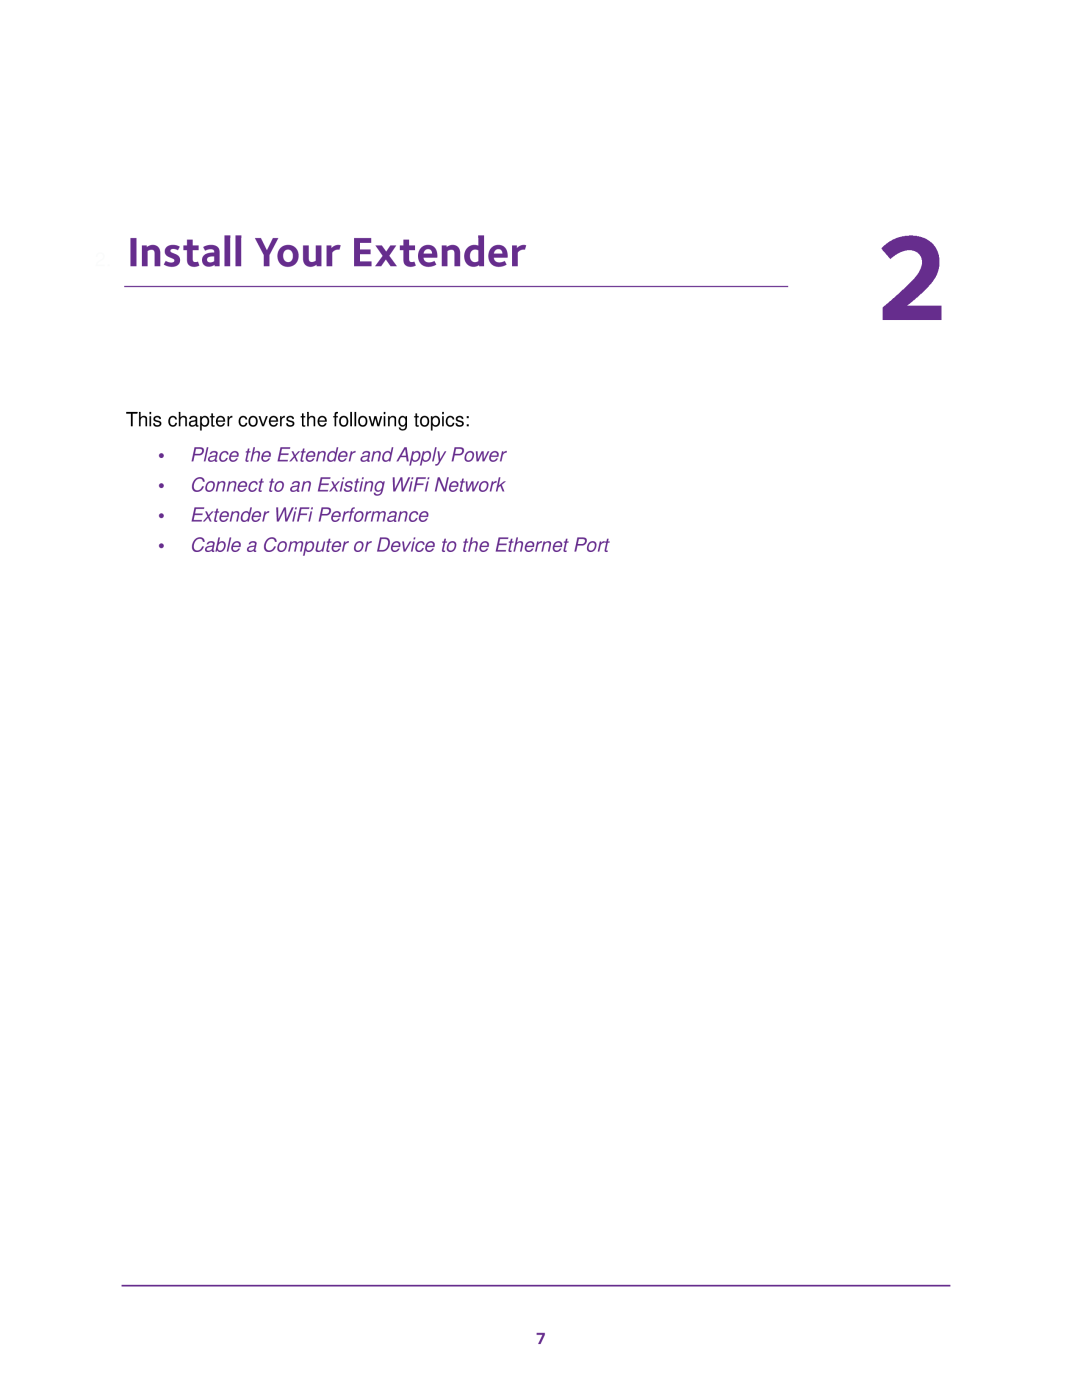 NETGEAR EX2700 Install Your Extender, Place the Extender and Apply Power, Cable a Computer or Device to the Ethernet Port 